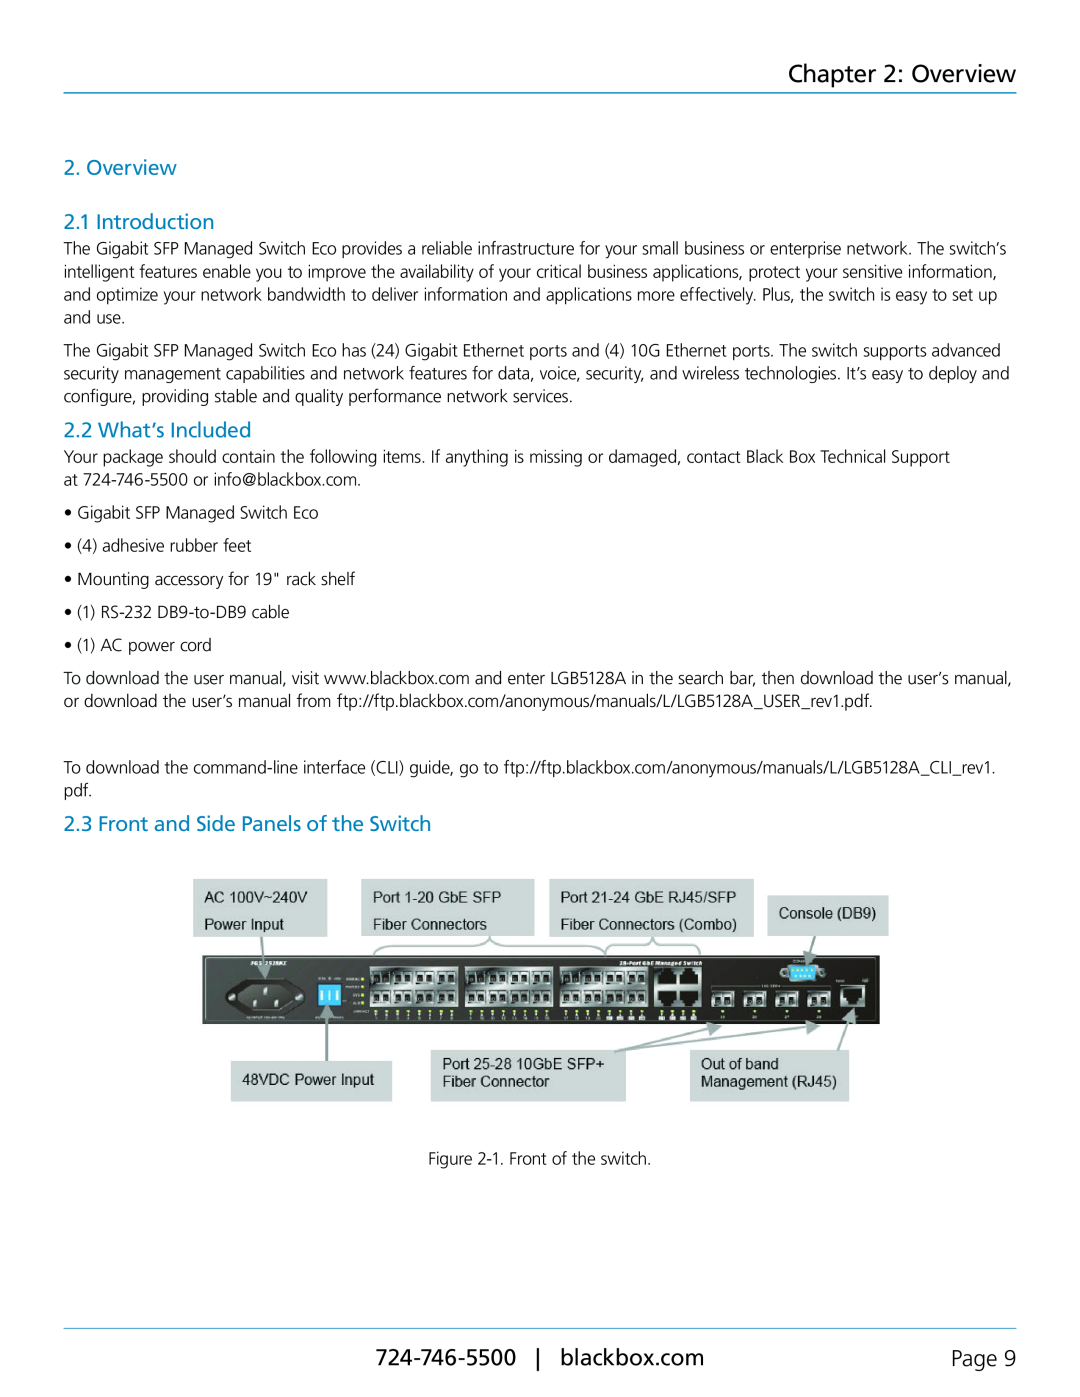 Black Box Black Box SFP Managed Switch Eco, LGB5128A Overview 2.1 Introduction, What’s Included, blackbox.com, Page 